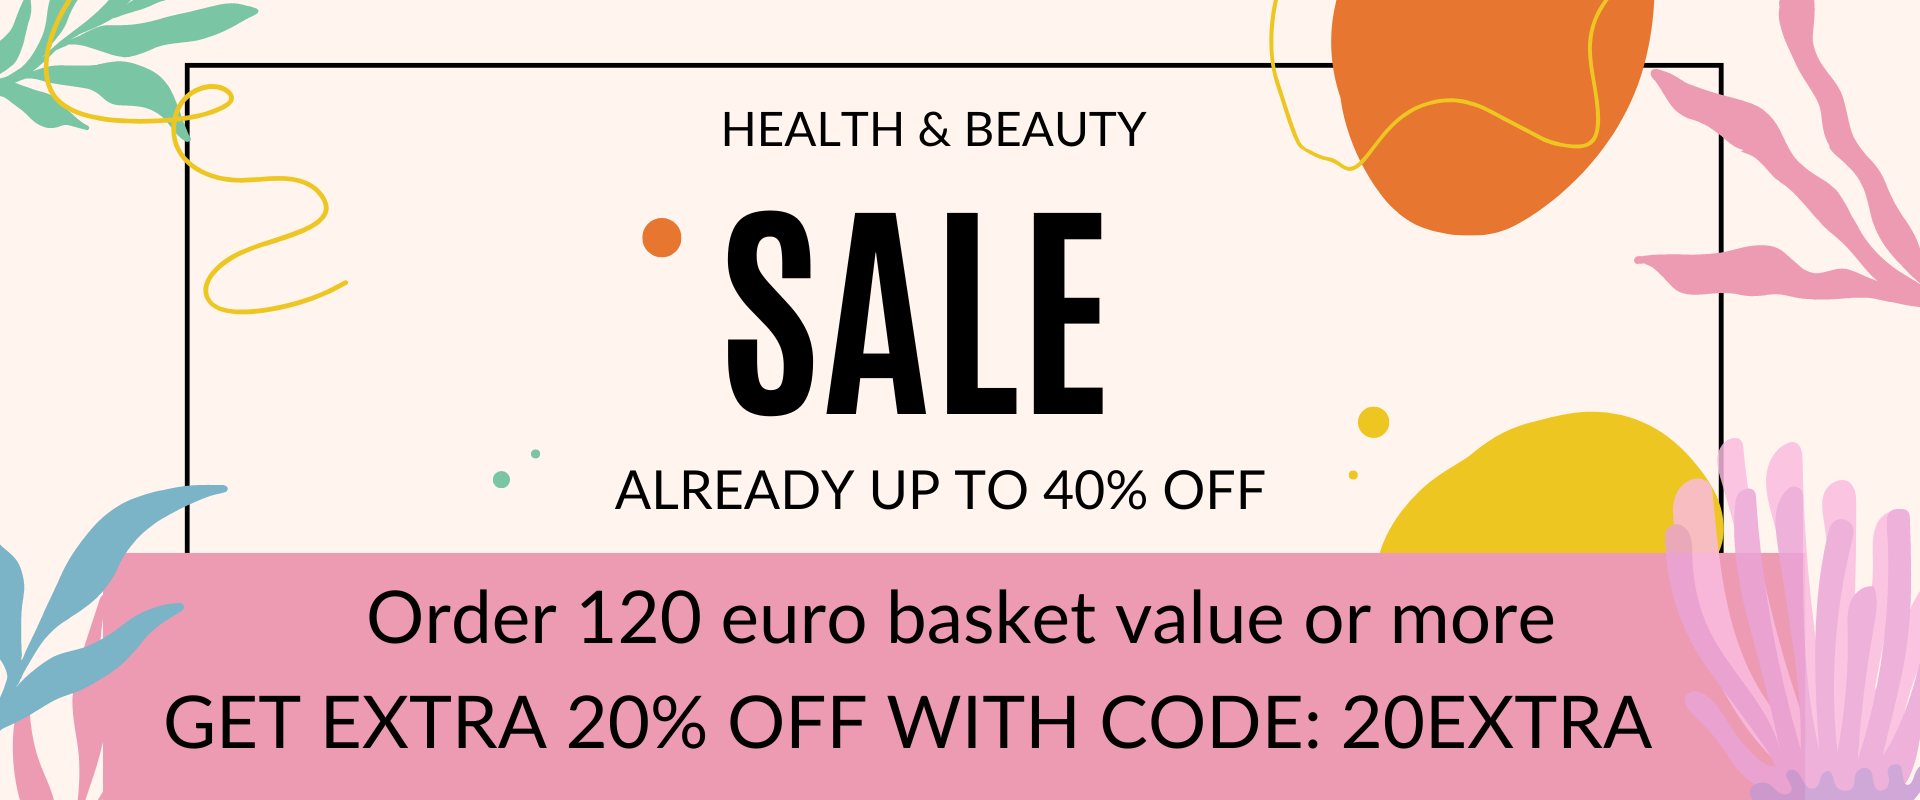 Get extra 20% off on any order over 120 euro with products from Sale collection